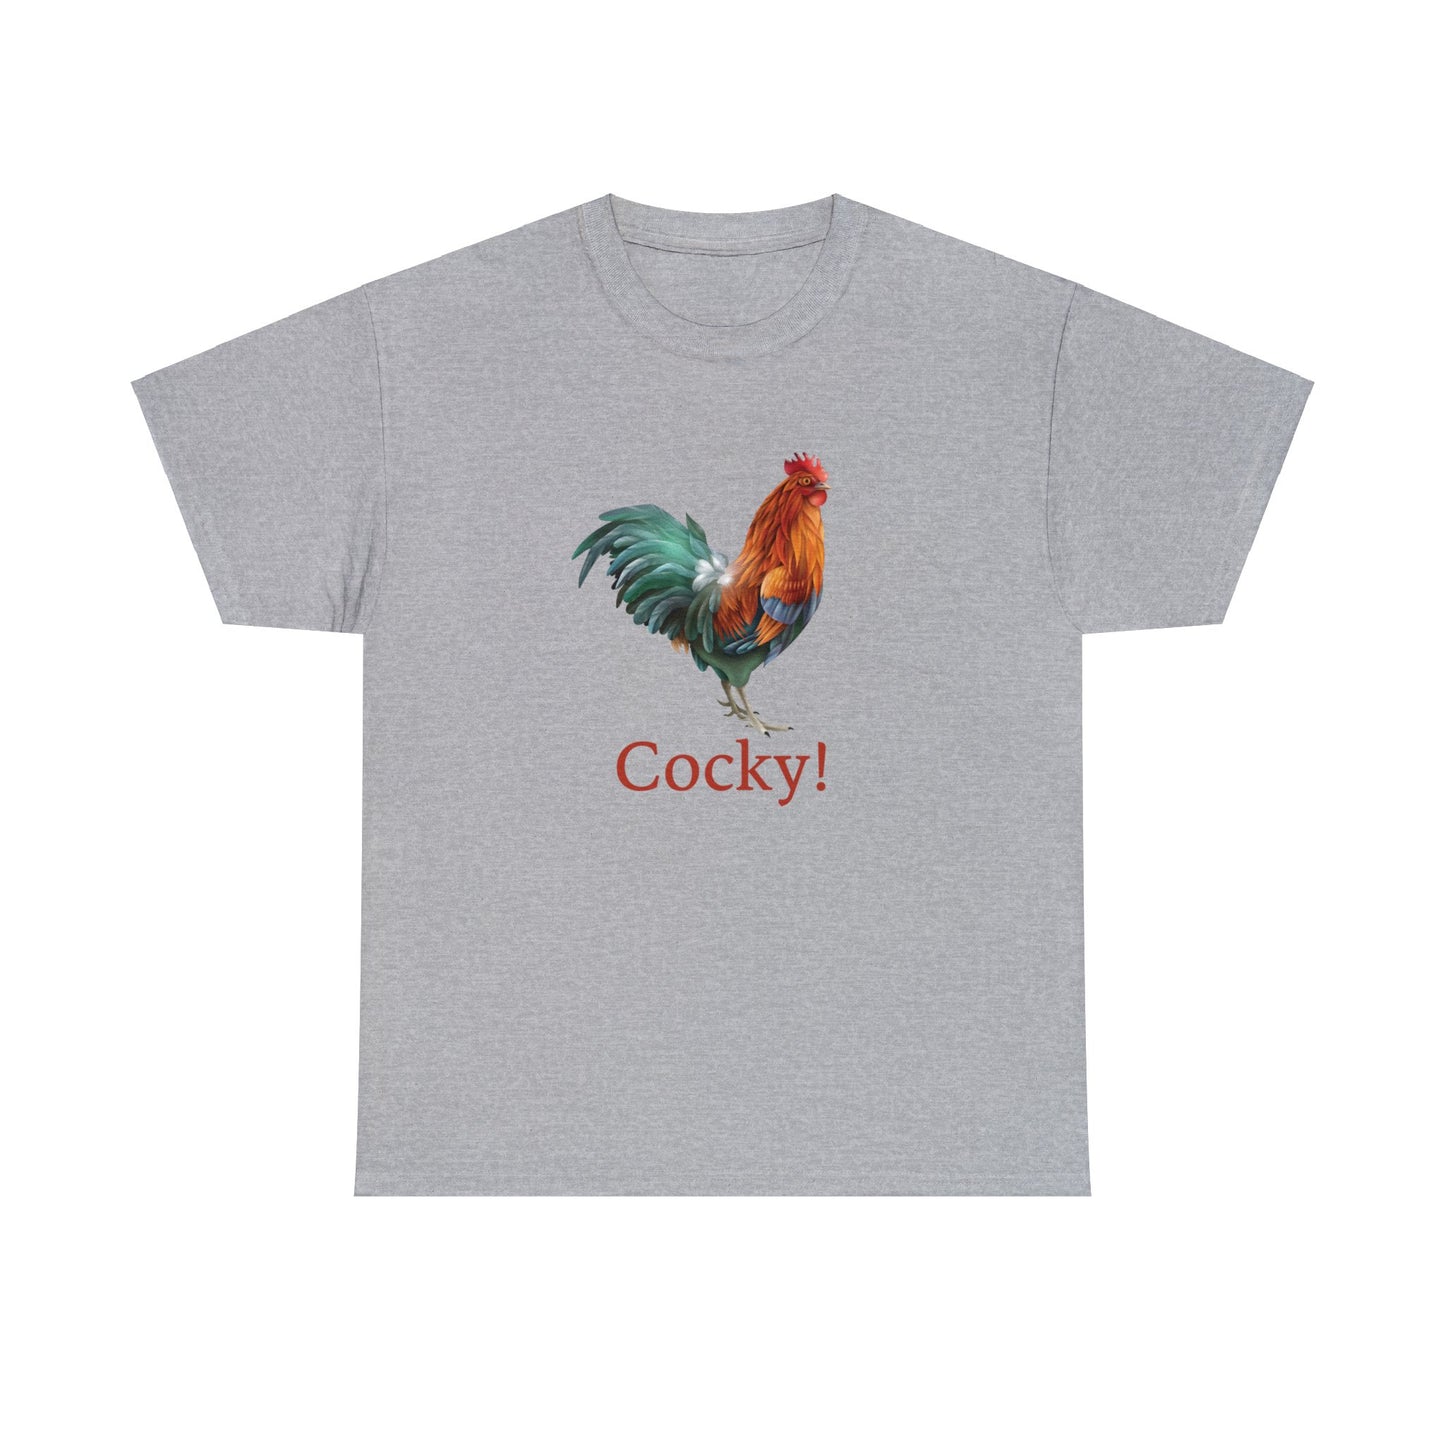 Rooster T-Shirt For Funny Animal T Shirt For Cocky TShirt For Sarcastic Tee